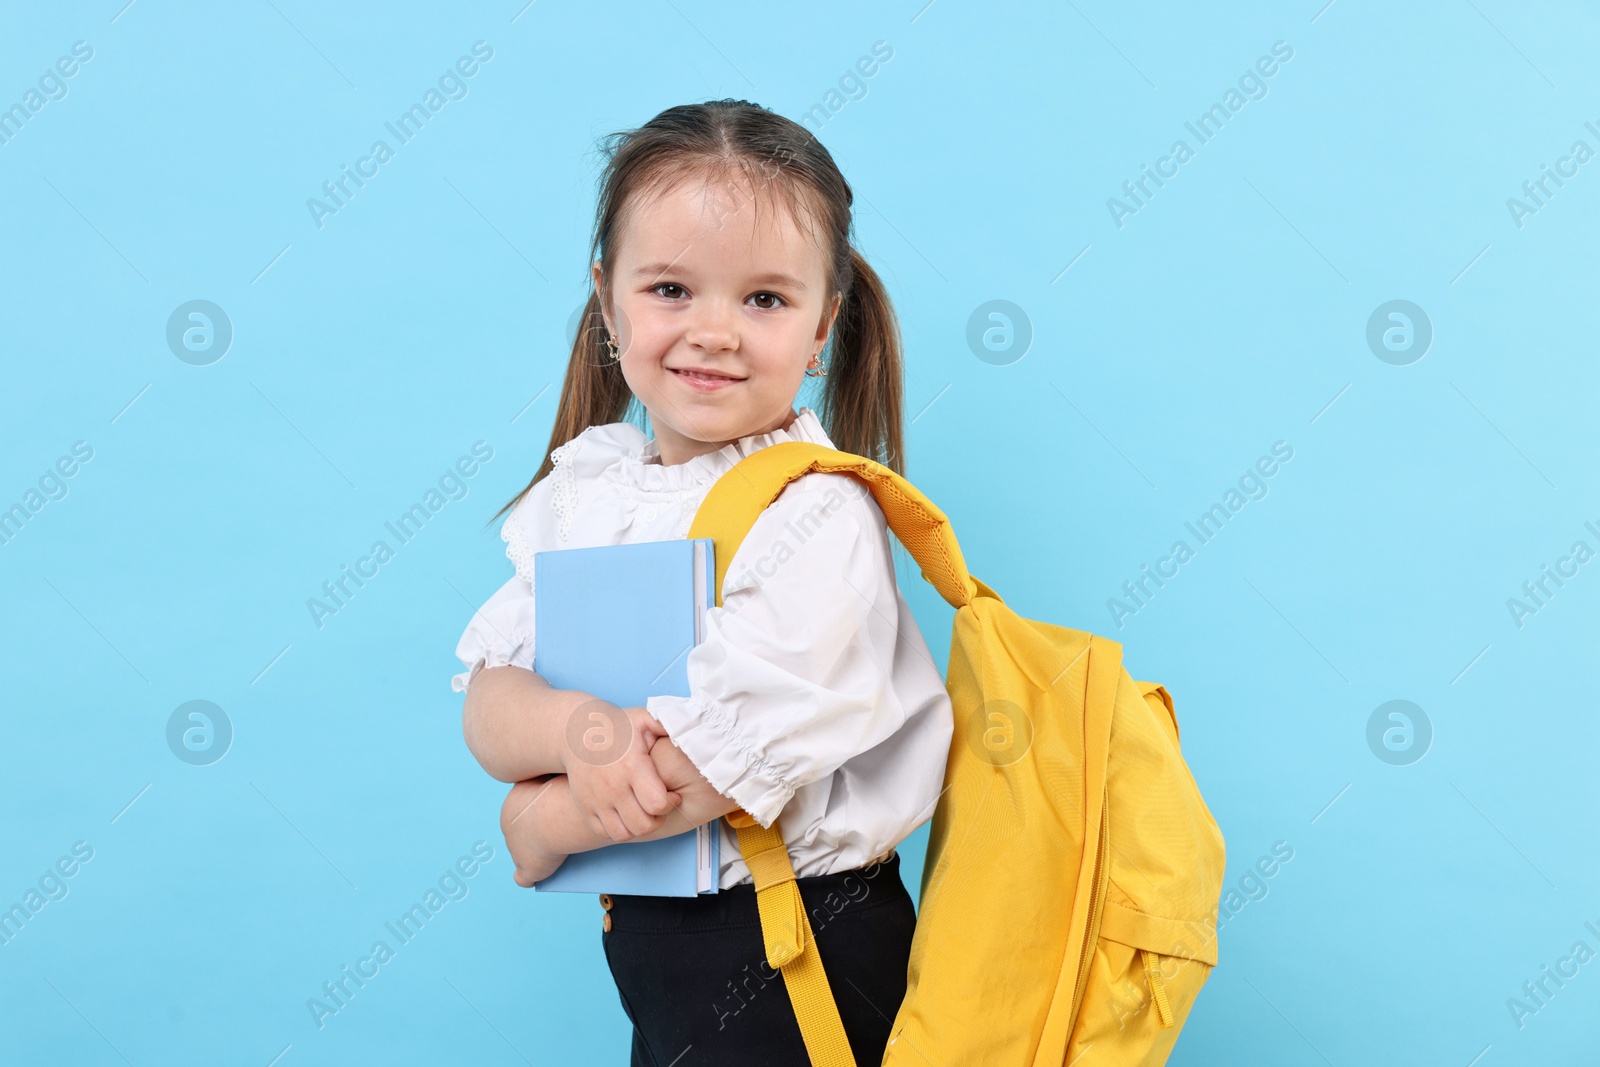 Photo of Cute little girl with book and backpack on light blue background